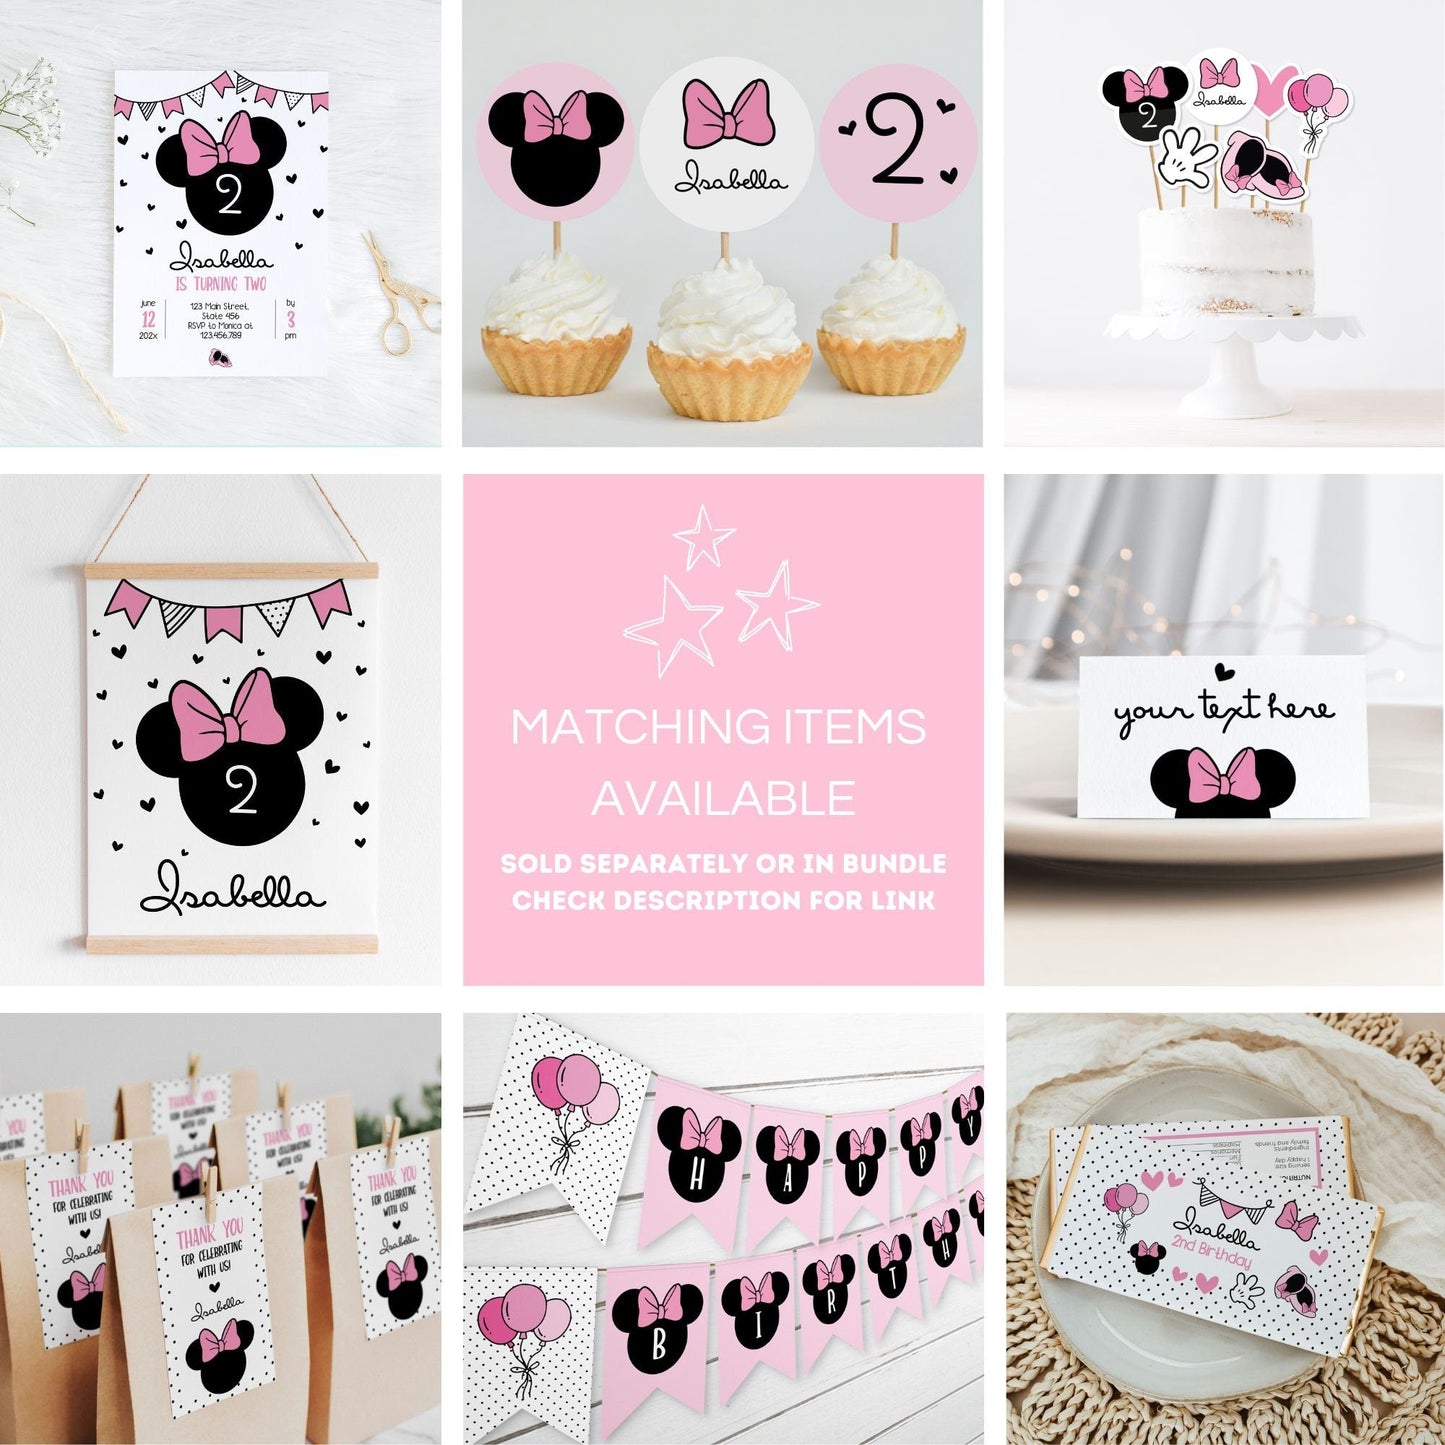 Minnie Mouse First Birthday Invitation | Oh Toodles ★ Instant Download | Editable Text - Digitally Printables